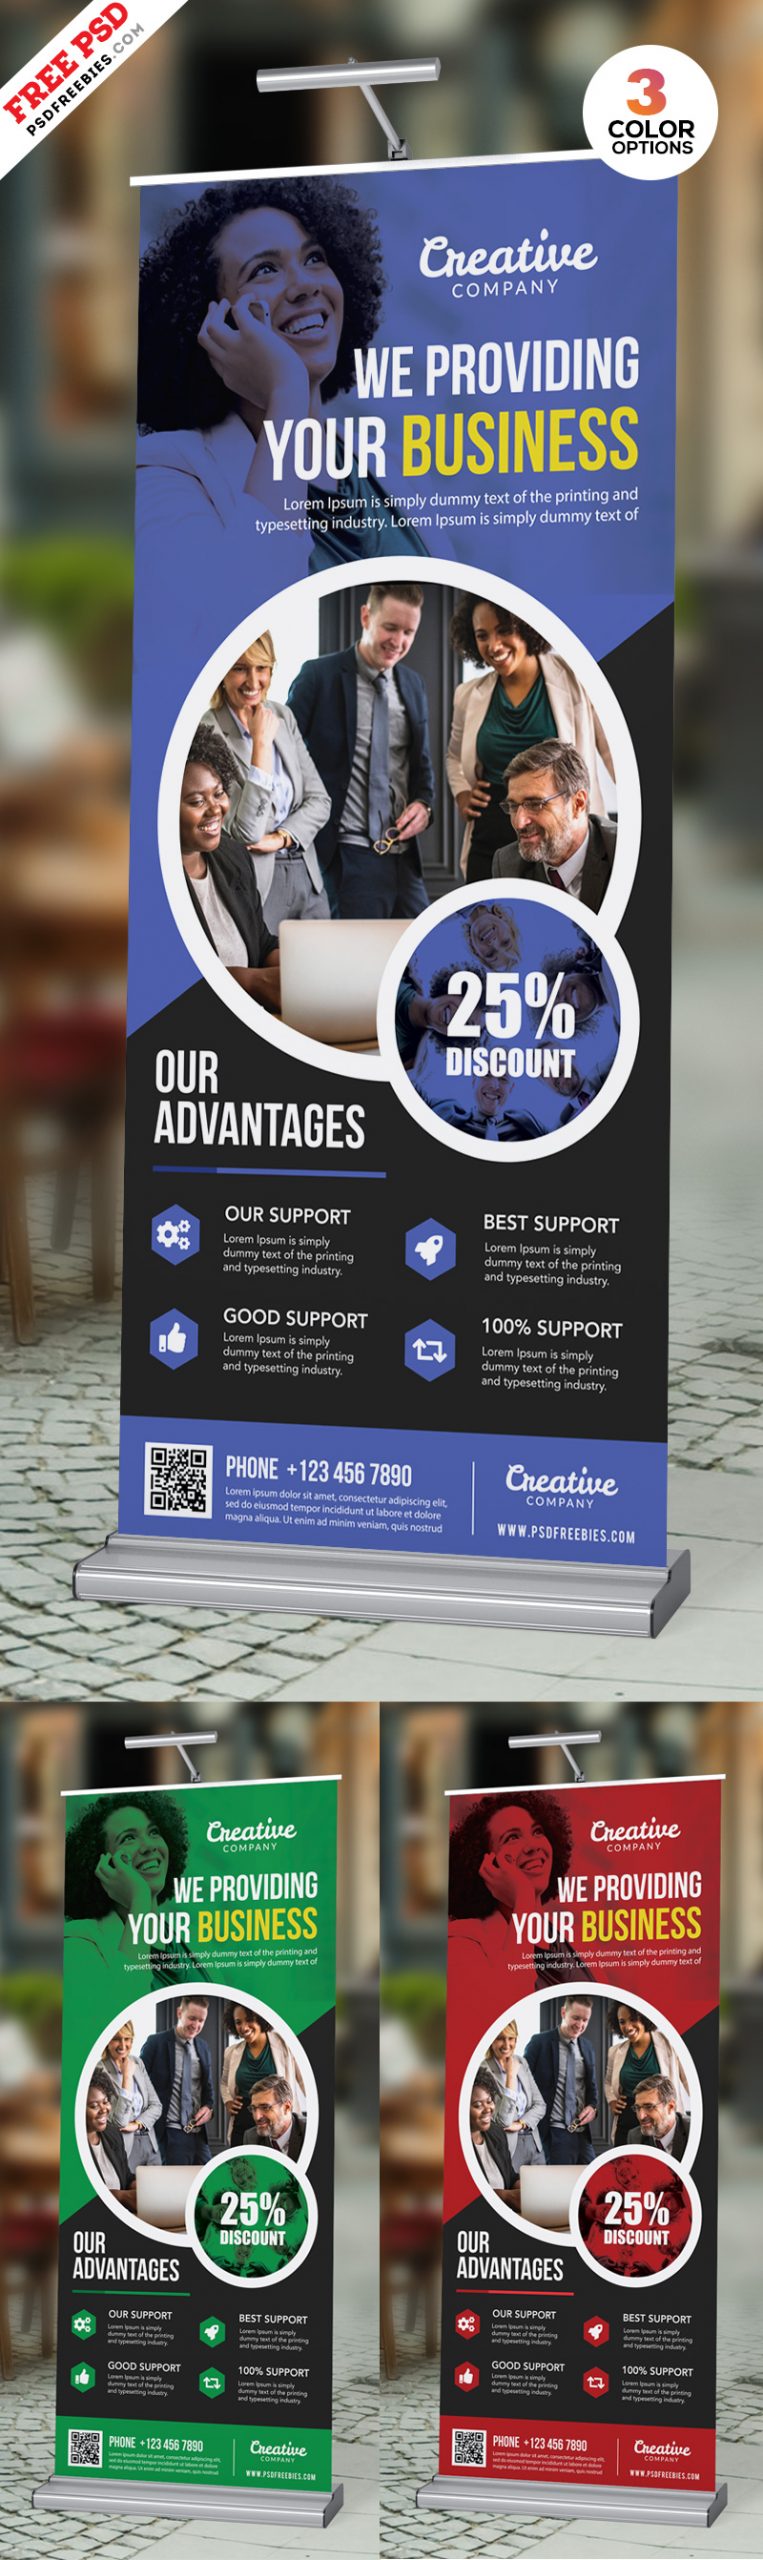 Roll-up Banner Design PSD Free Download